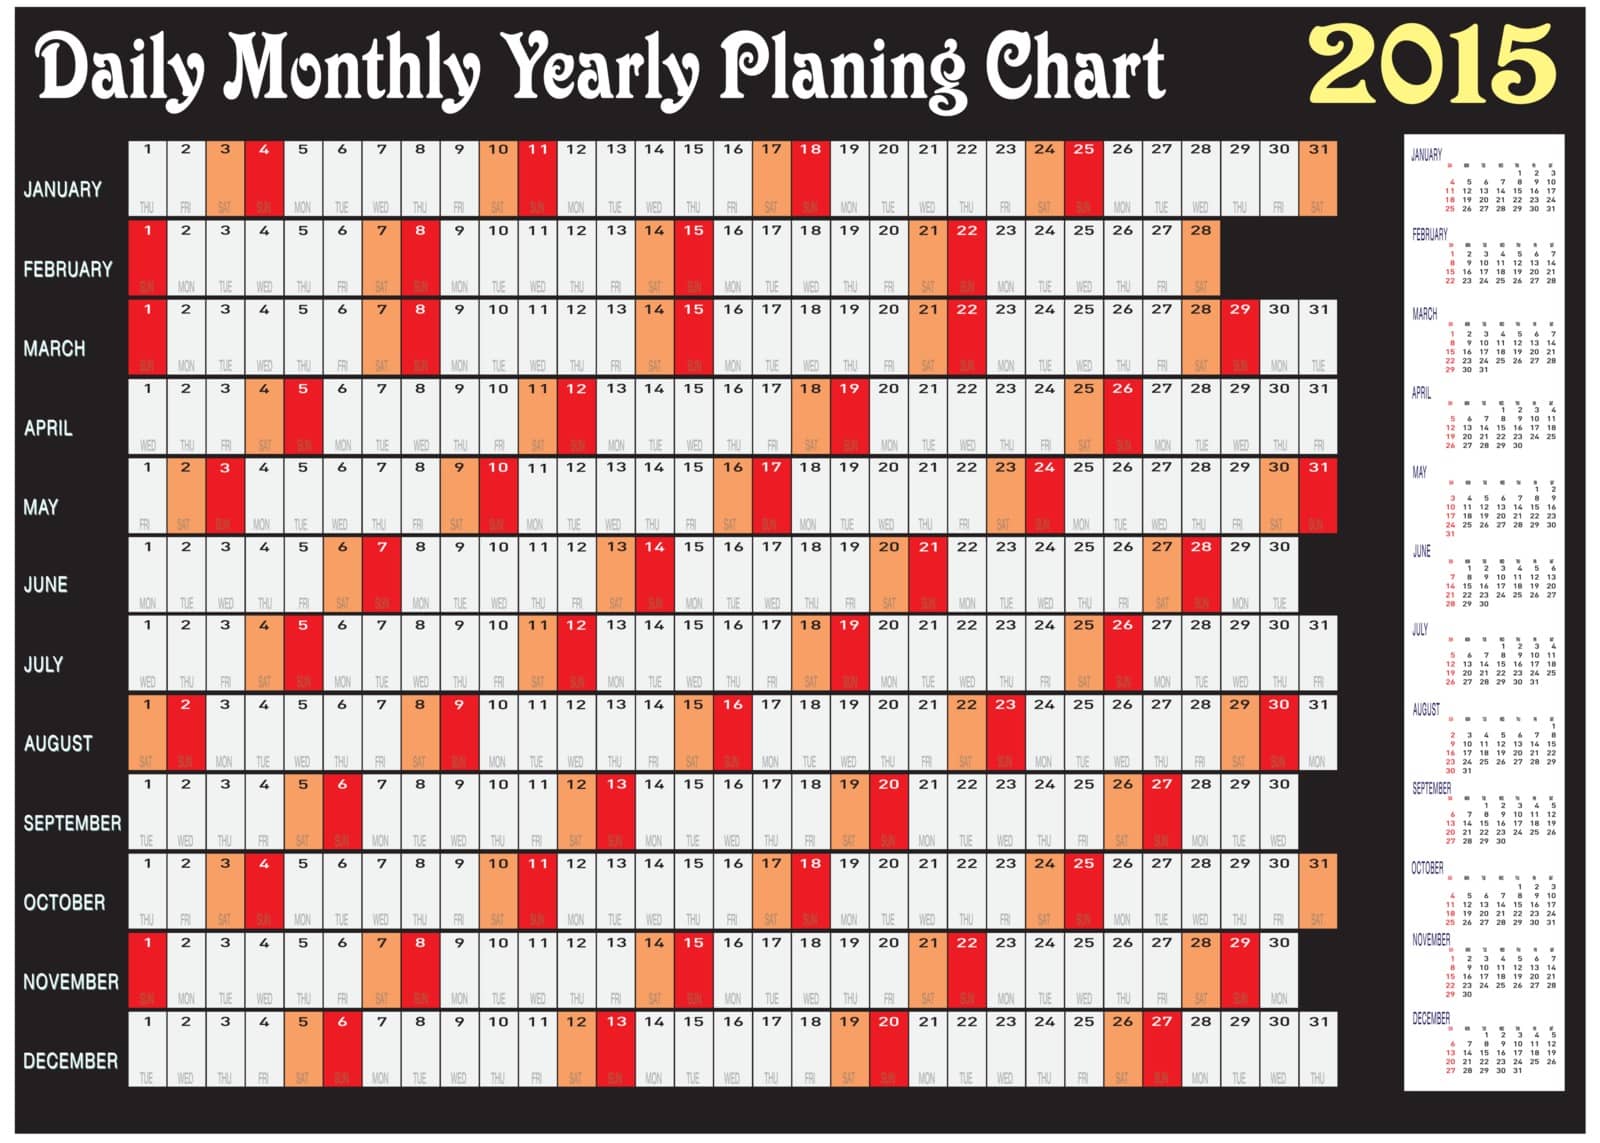 Daily Monthly Yearly Planing Chart 2015 by kobfujar